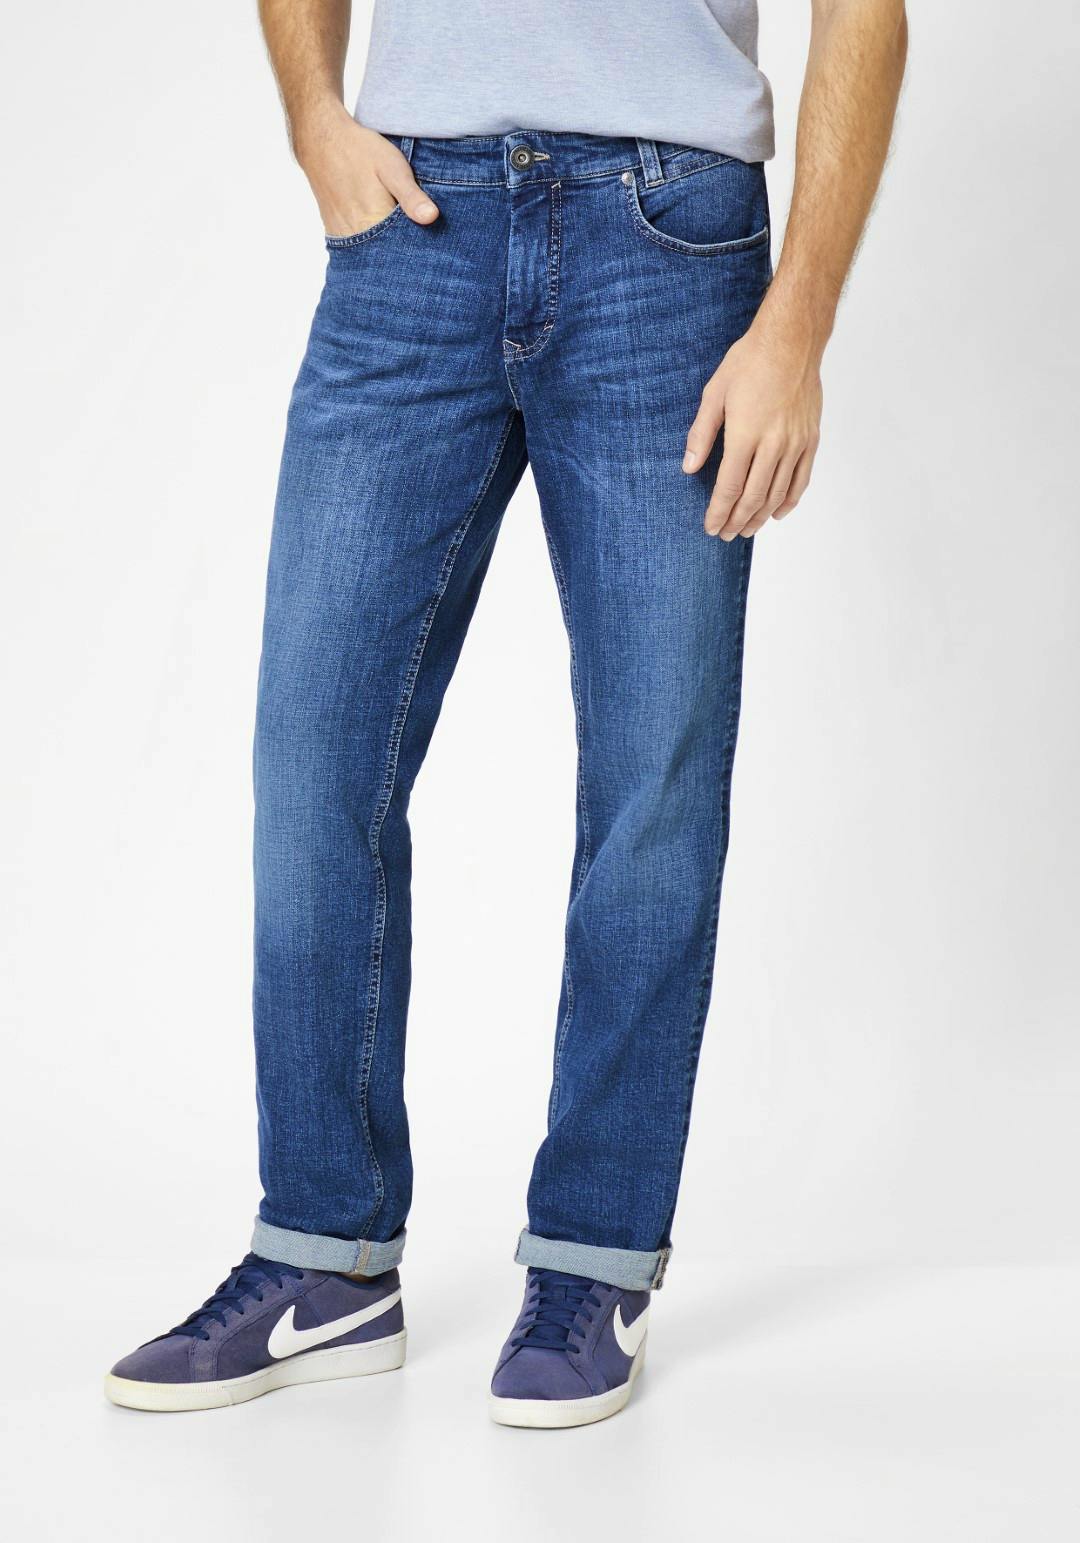 Image of Paddock&#039s Ranger Pipe Motion &amp Comfort Slim Fit mid blue extra lang